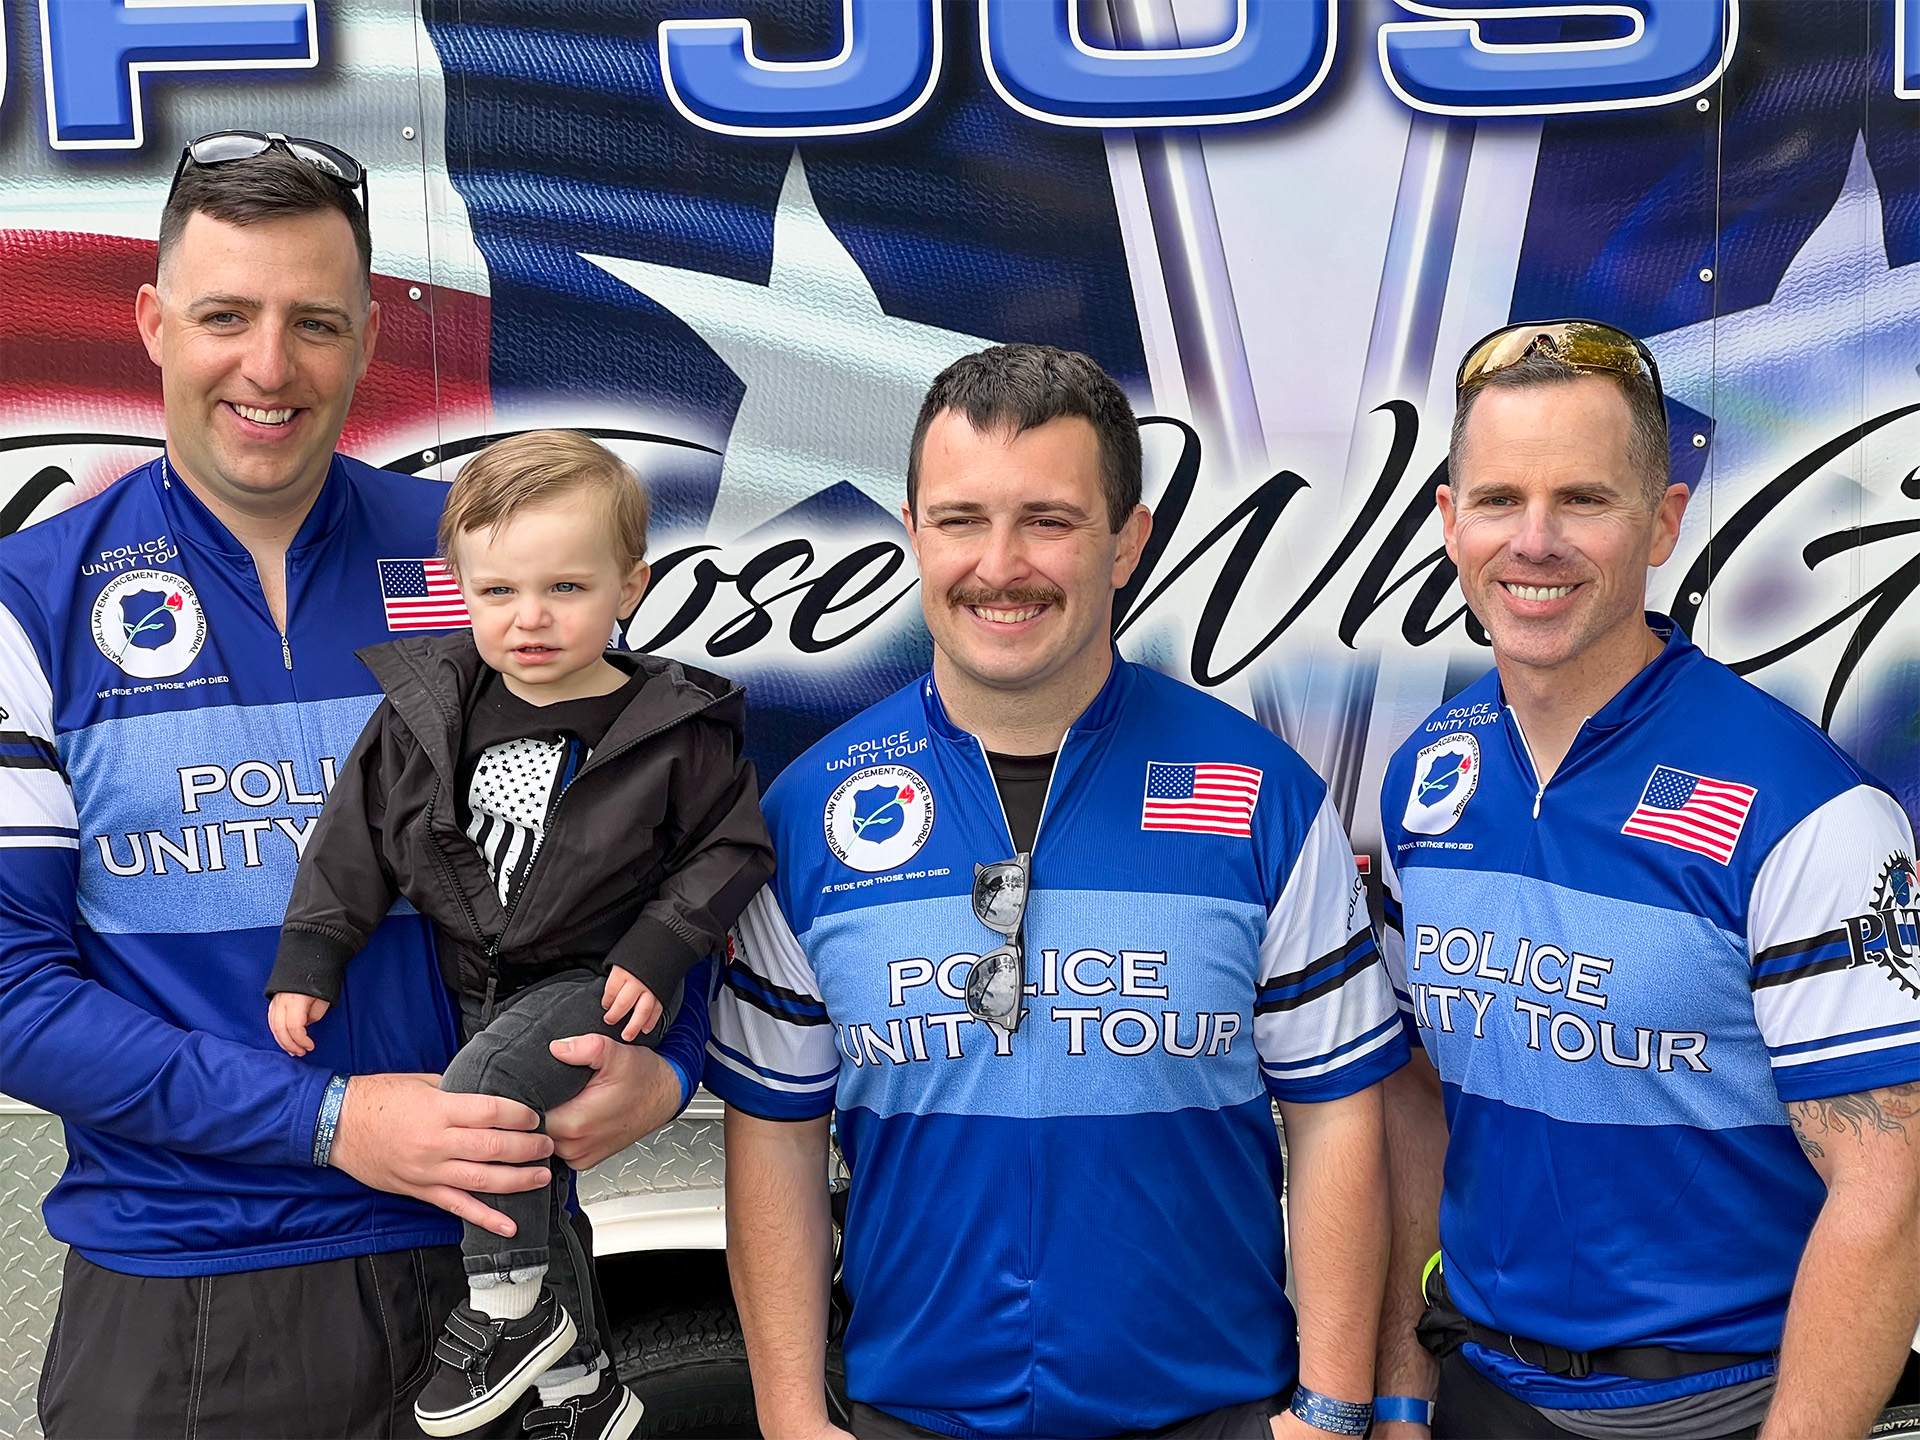 Police Unity Tour 2023 officers pose for photo.